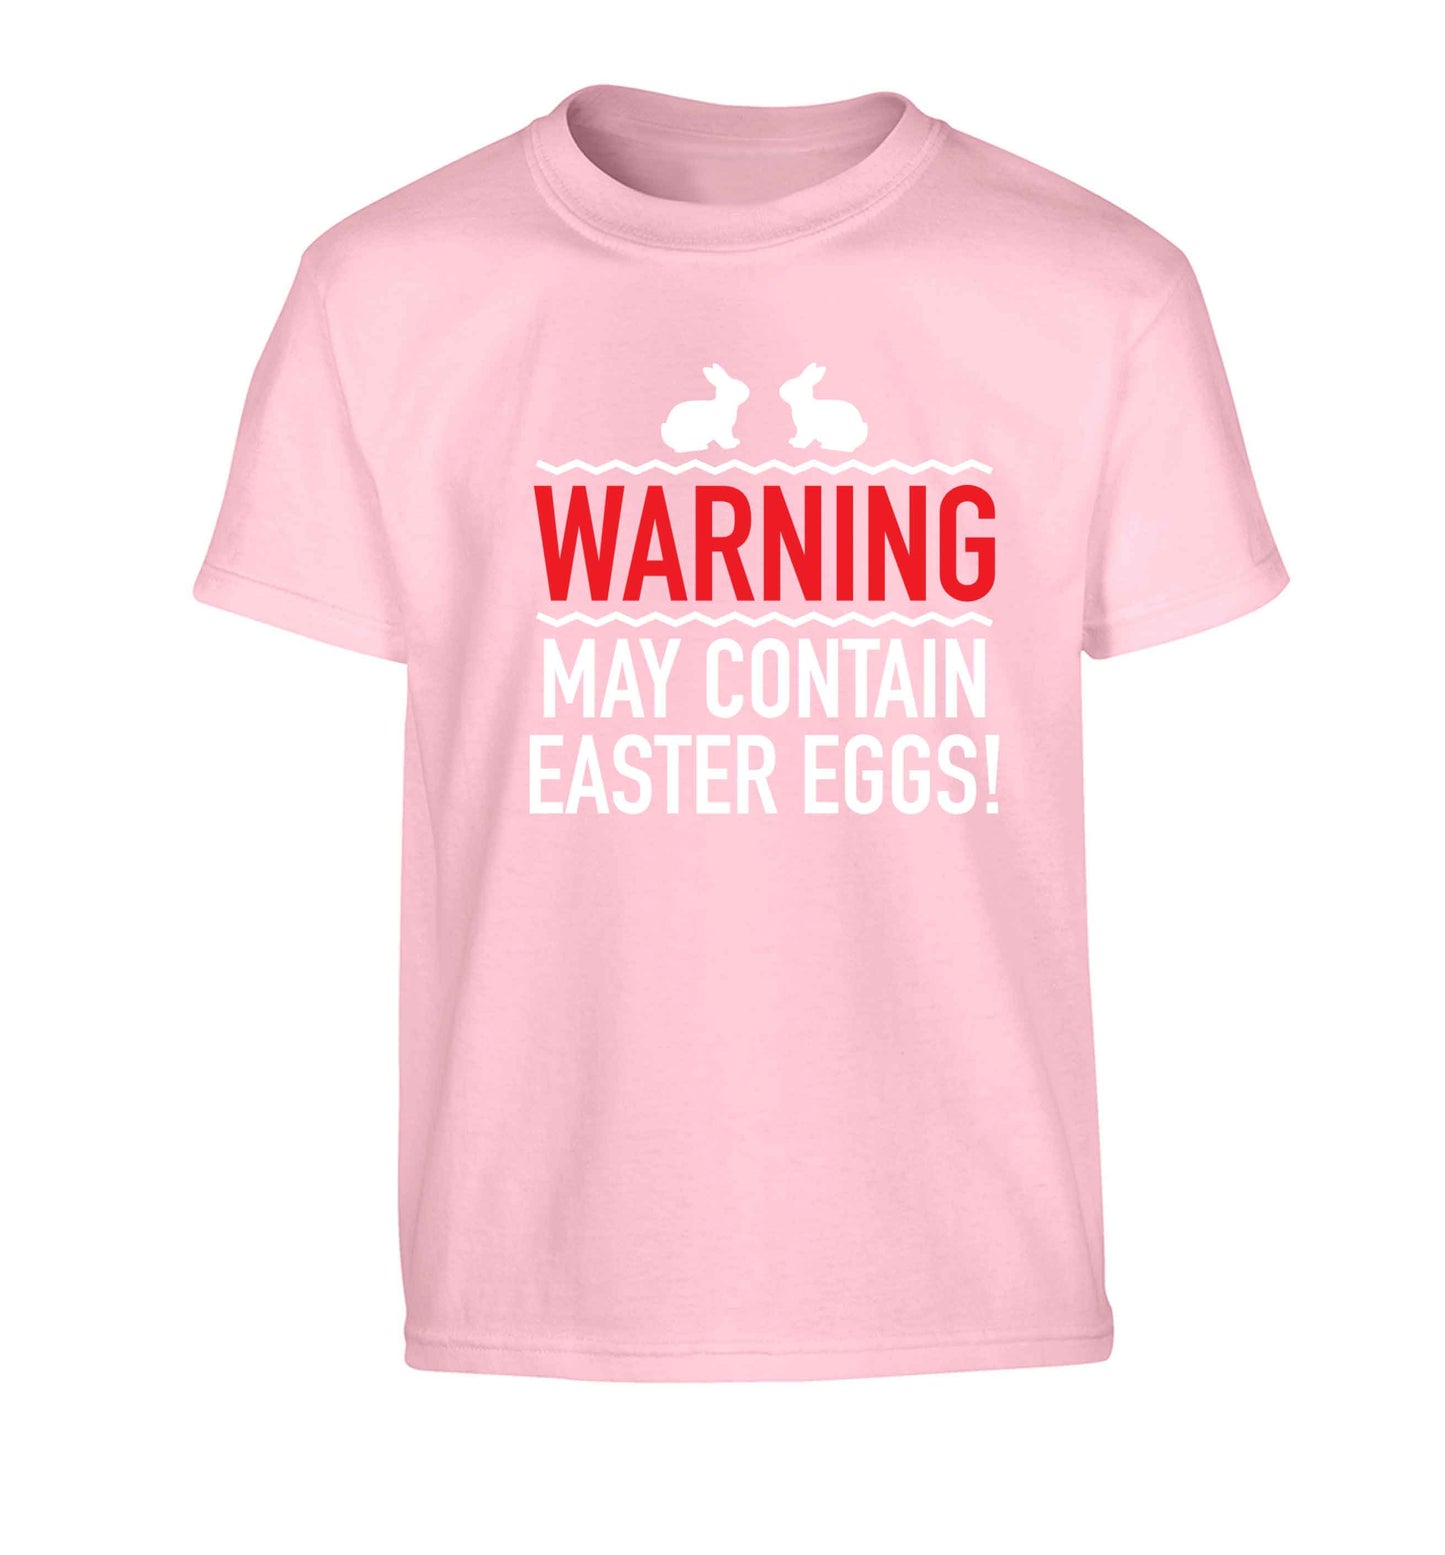 Warning may contain Easter eggs Children's light pink Tshirt 12-13 Years